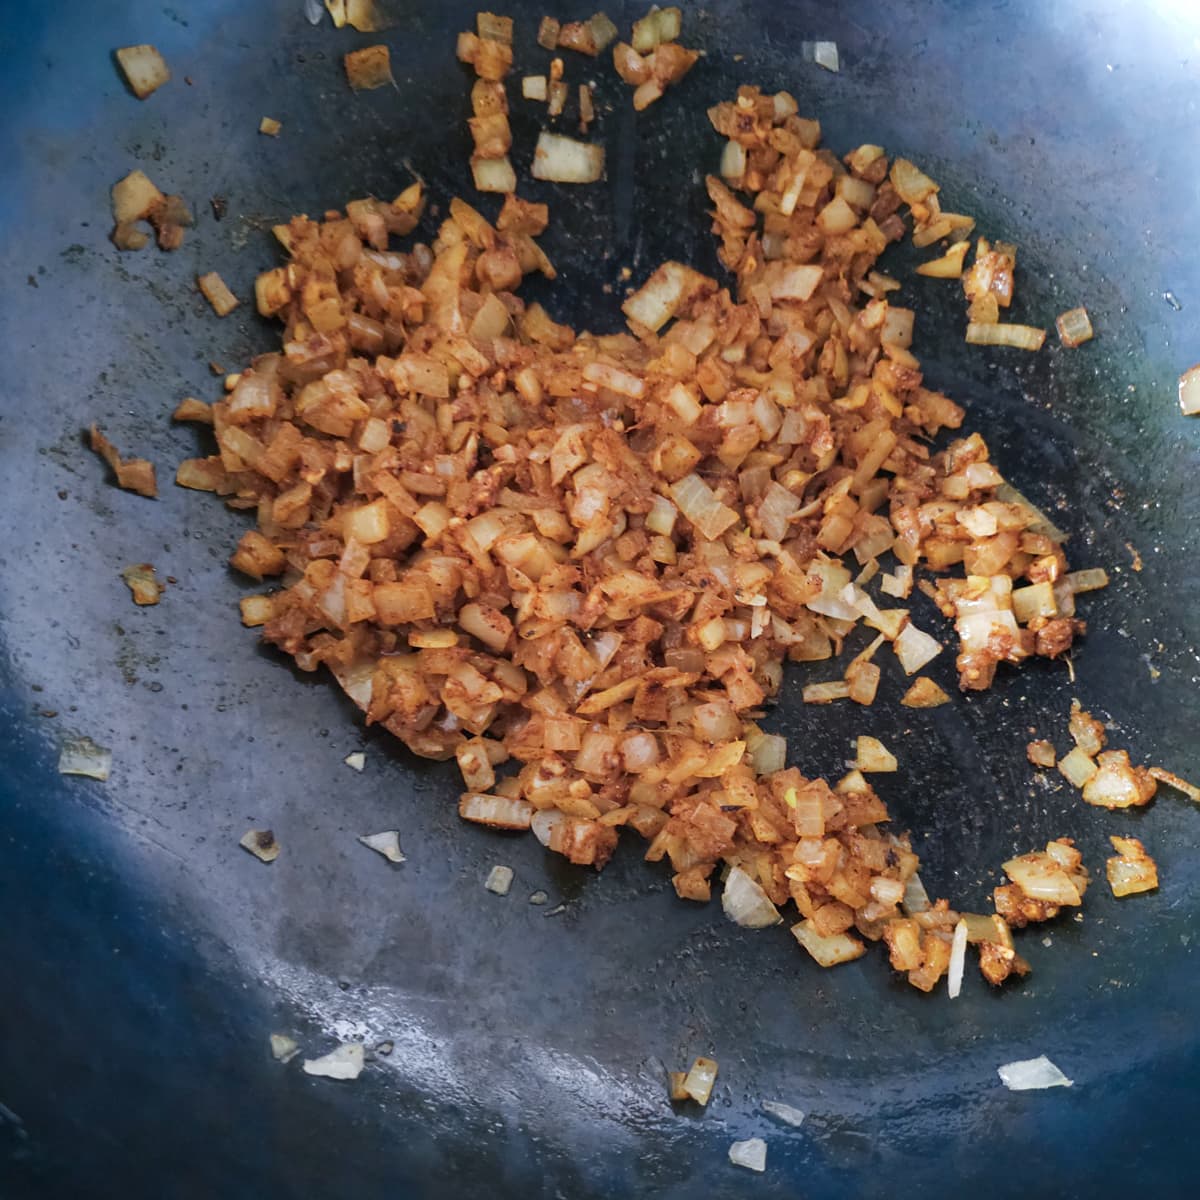 Onion cooking with Indian spice mix.